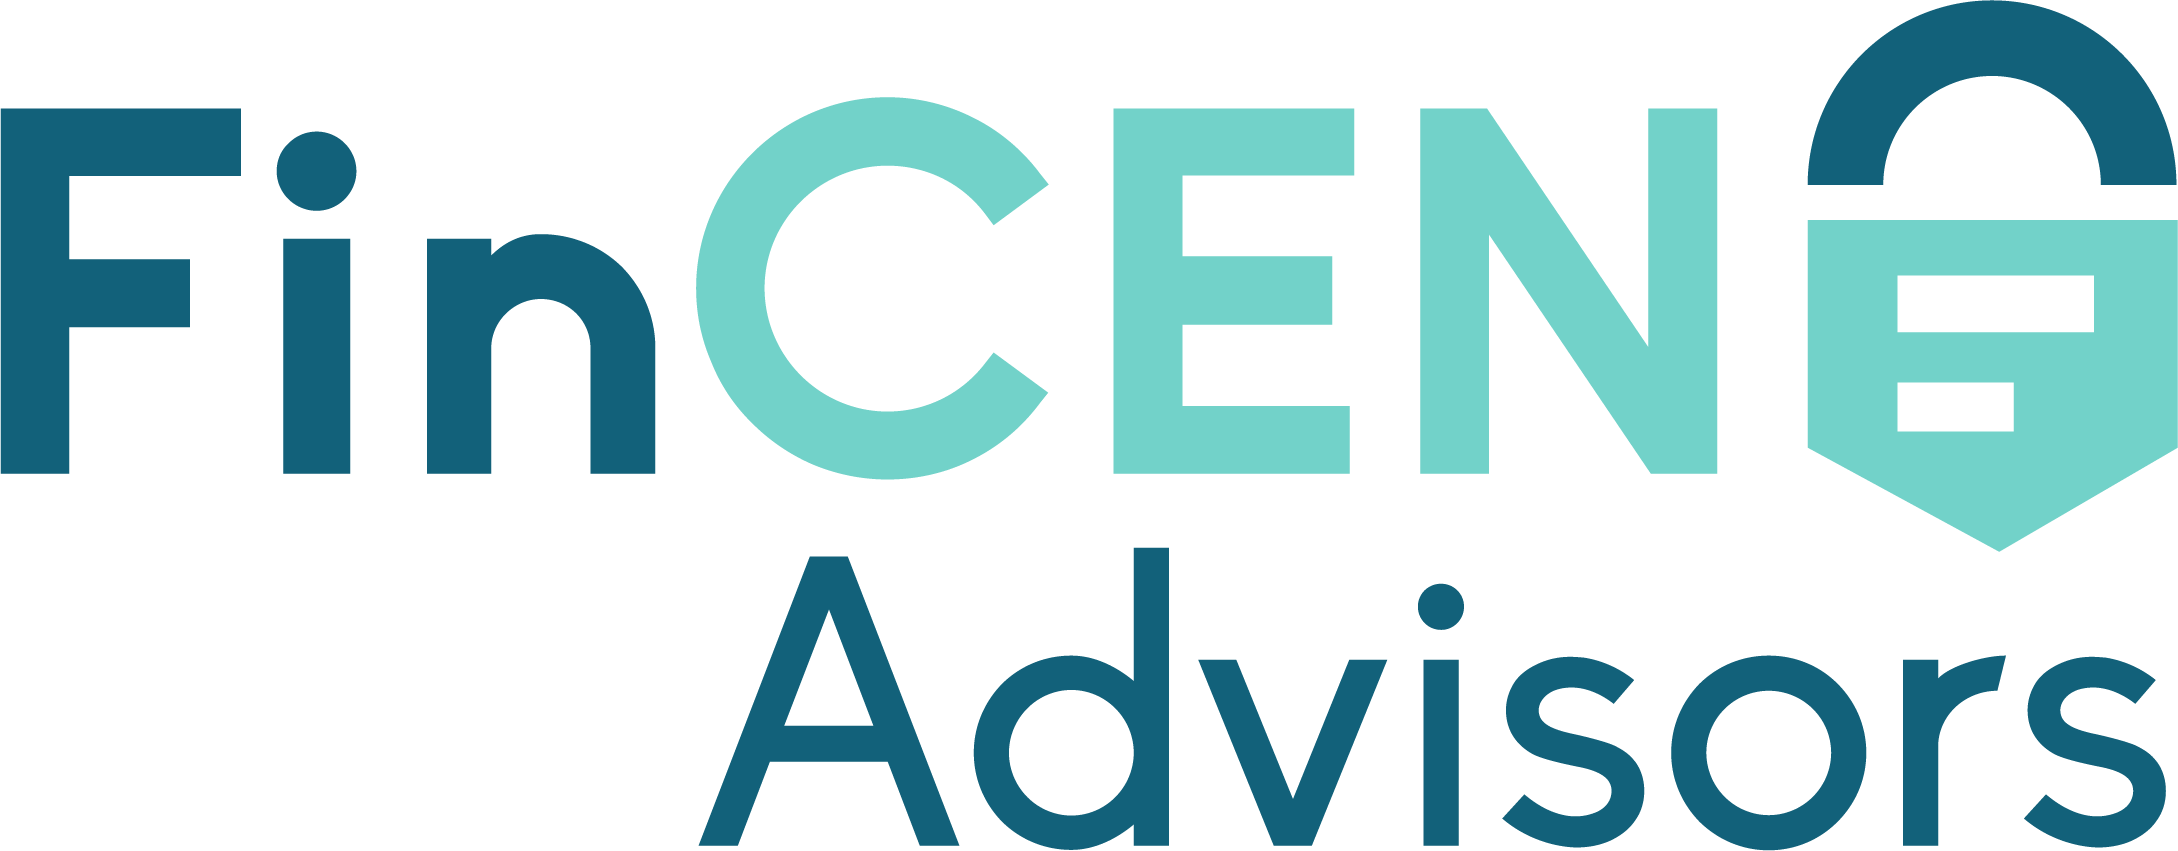 Logo for FinCEN Advisors featuring the text "FinCEN" in large blue and teal letters beside a padlock icon, with the word "Advisors" in smaller blue letters beneath, creating a default kit for financial advisory branding.